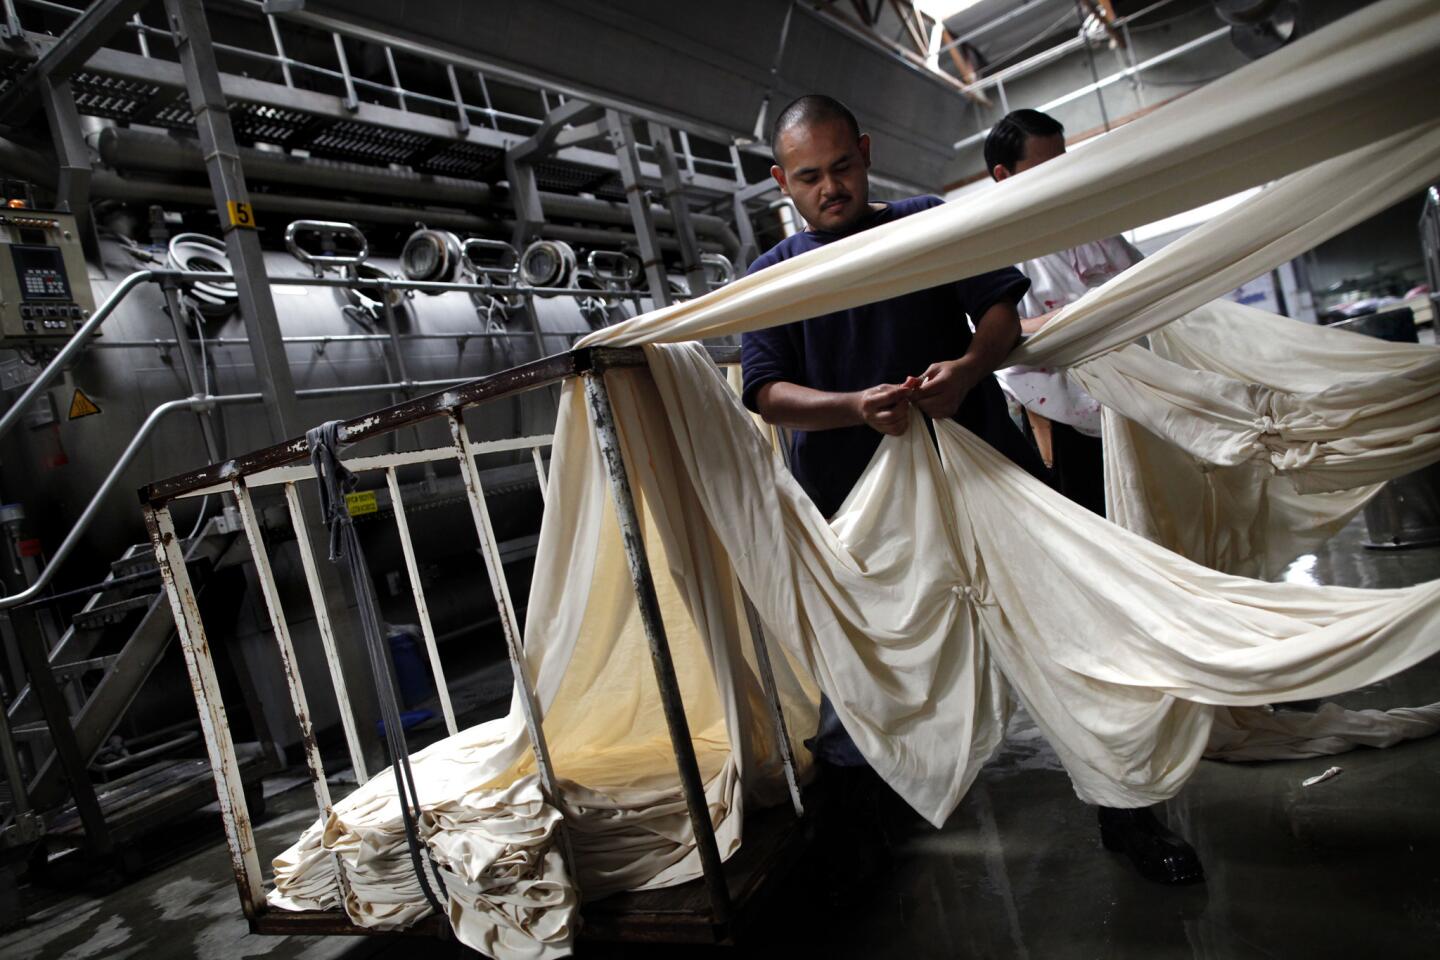 American Apparel employees handle cloth at the company's manufacturing plant in downtown Los Angeles.